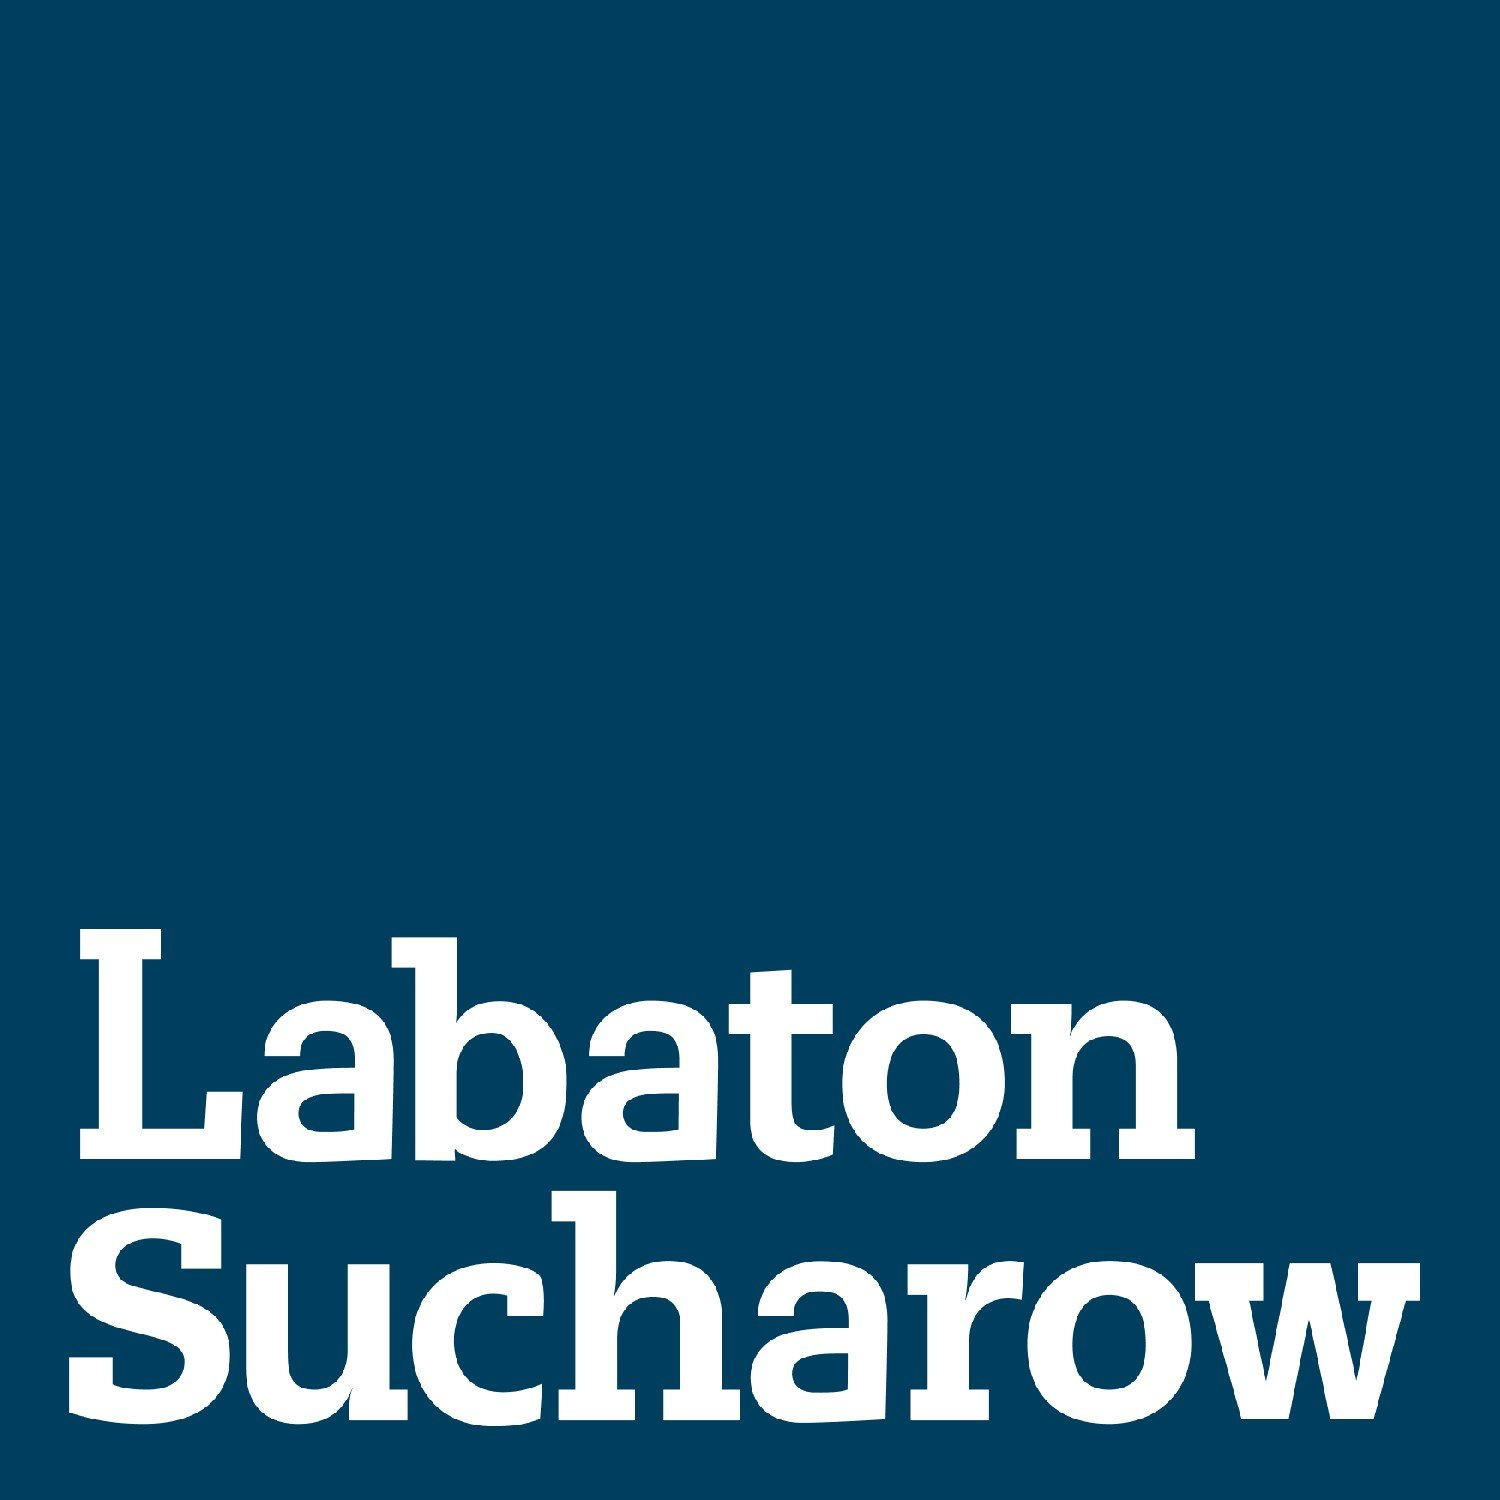 Labaton Sucharow LLP, Tuesday, April 6, 2021, Press release picture